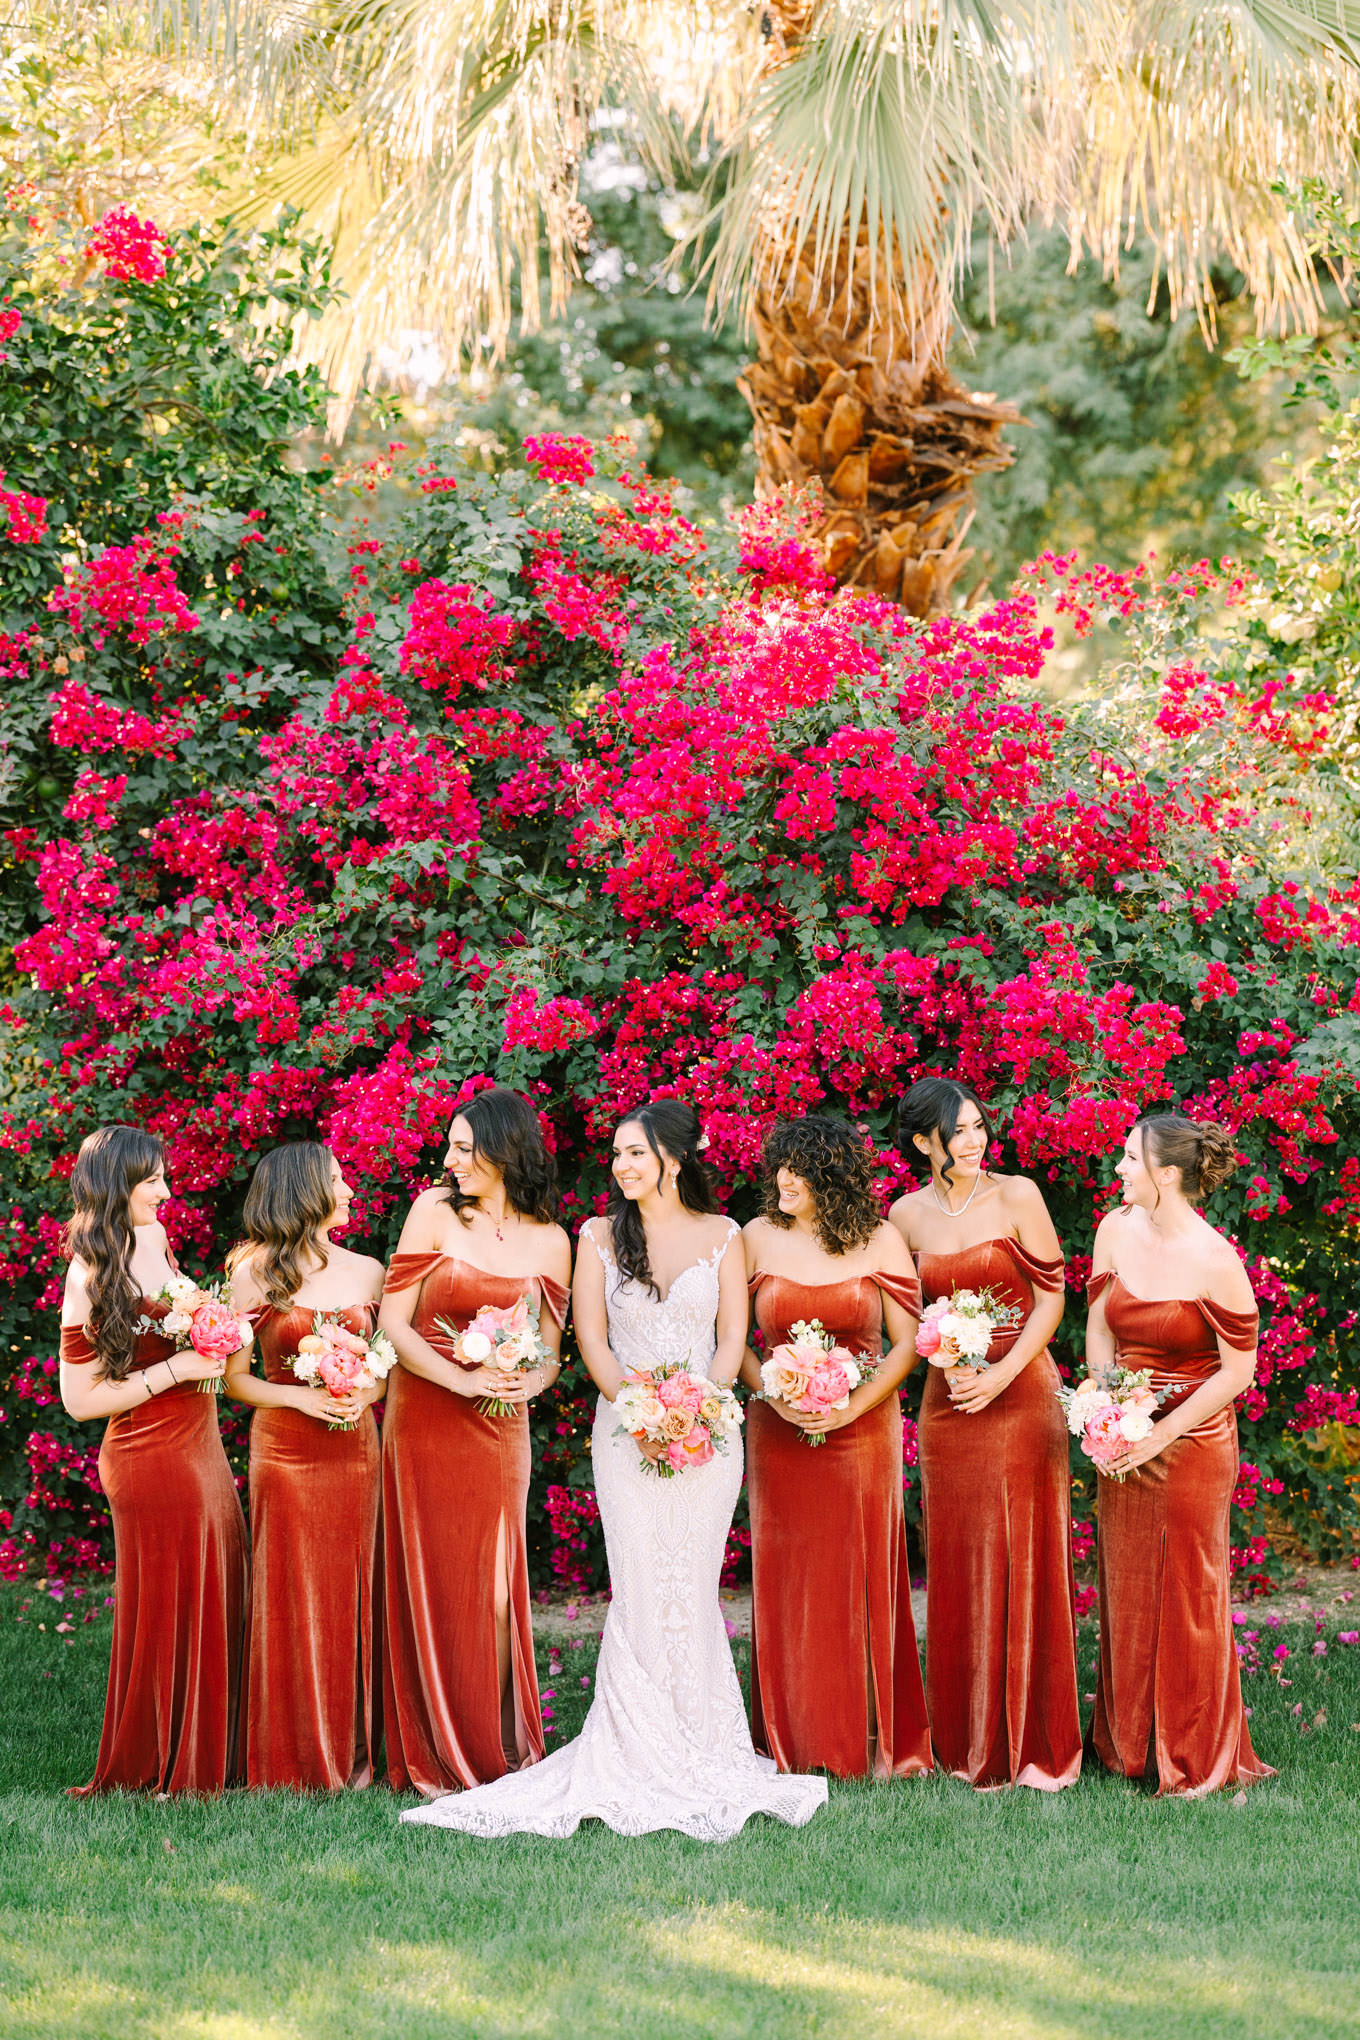 Orange bridal party| Pink Bougainvillea Estate wedding | Colorful LA wedding photography | #bougainvilleaestate #palmspringswedding #palmspringsweddingvenue #palmspringsphotographer Source: Mary Costa Photography | Los Angeles